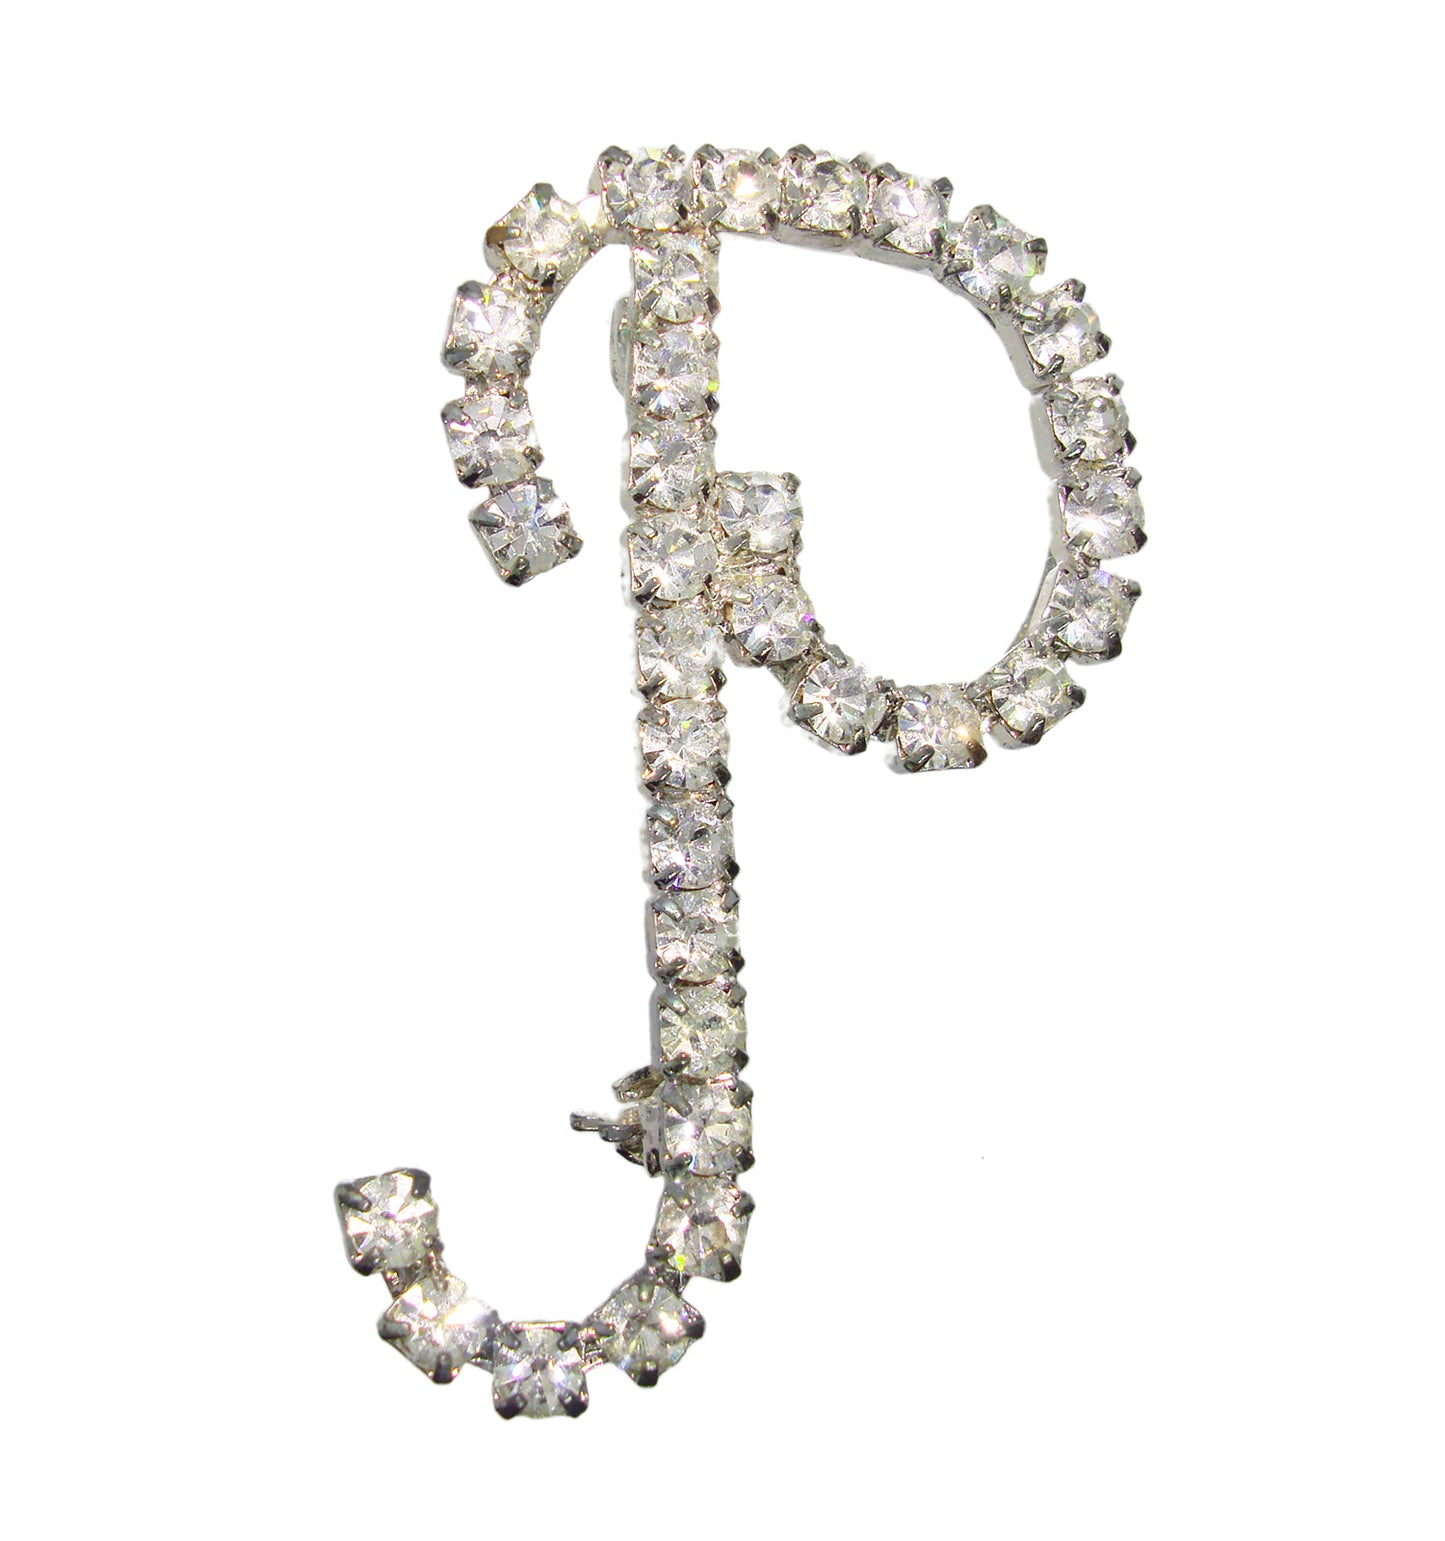 Initial "P" Pin Brooch Pave Rhinestones Silver Tone 1 1/2"